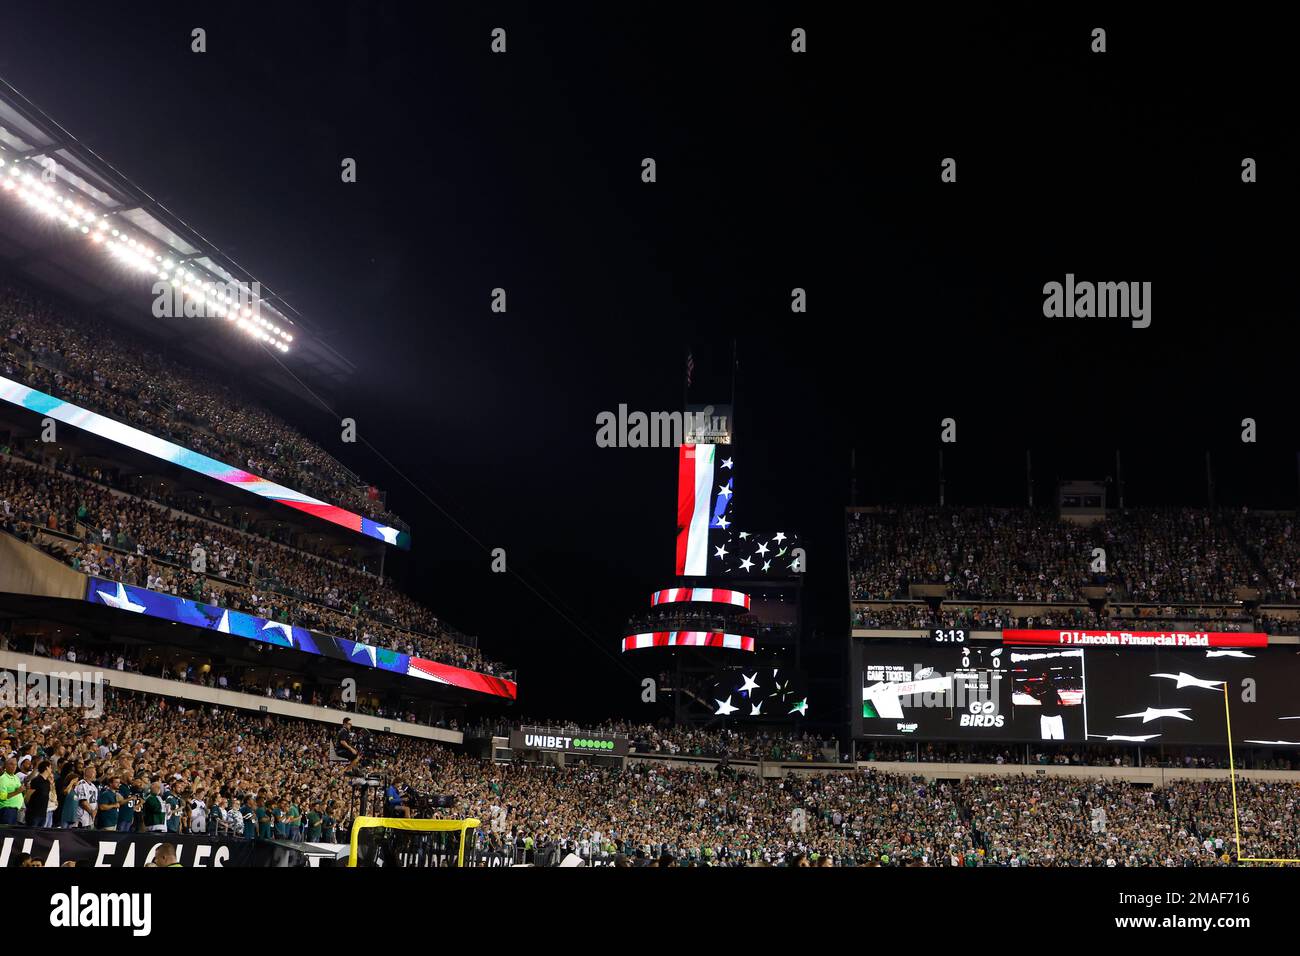 The crowd / fans at Lincoln Financial Field during the national